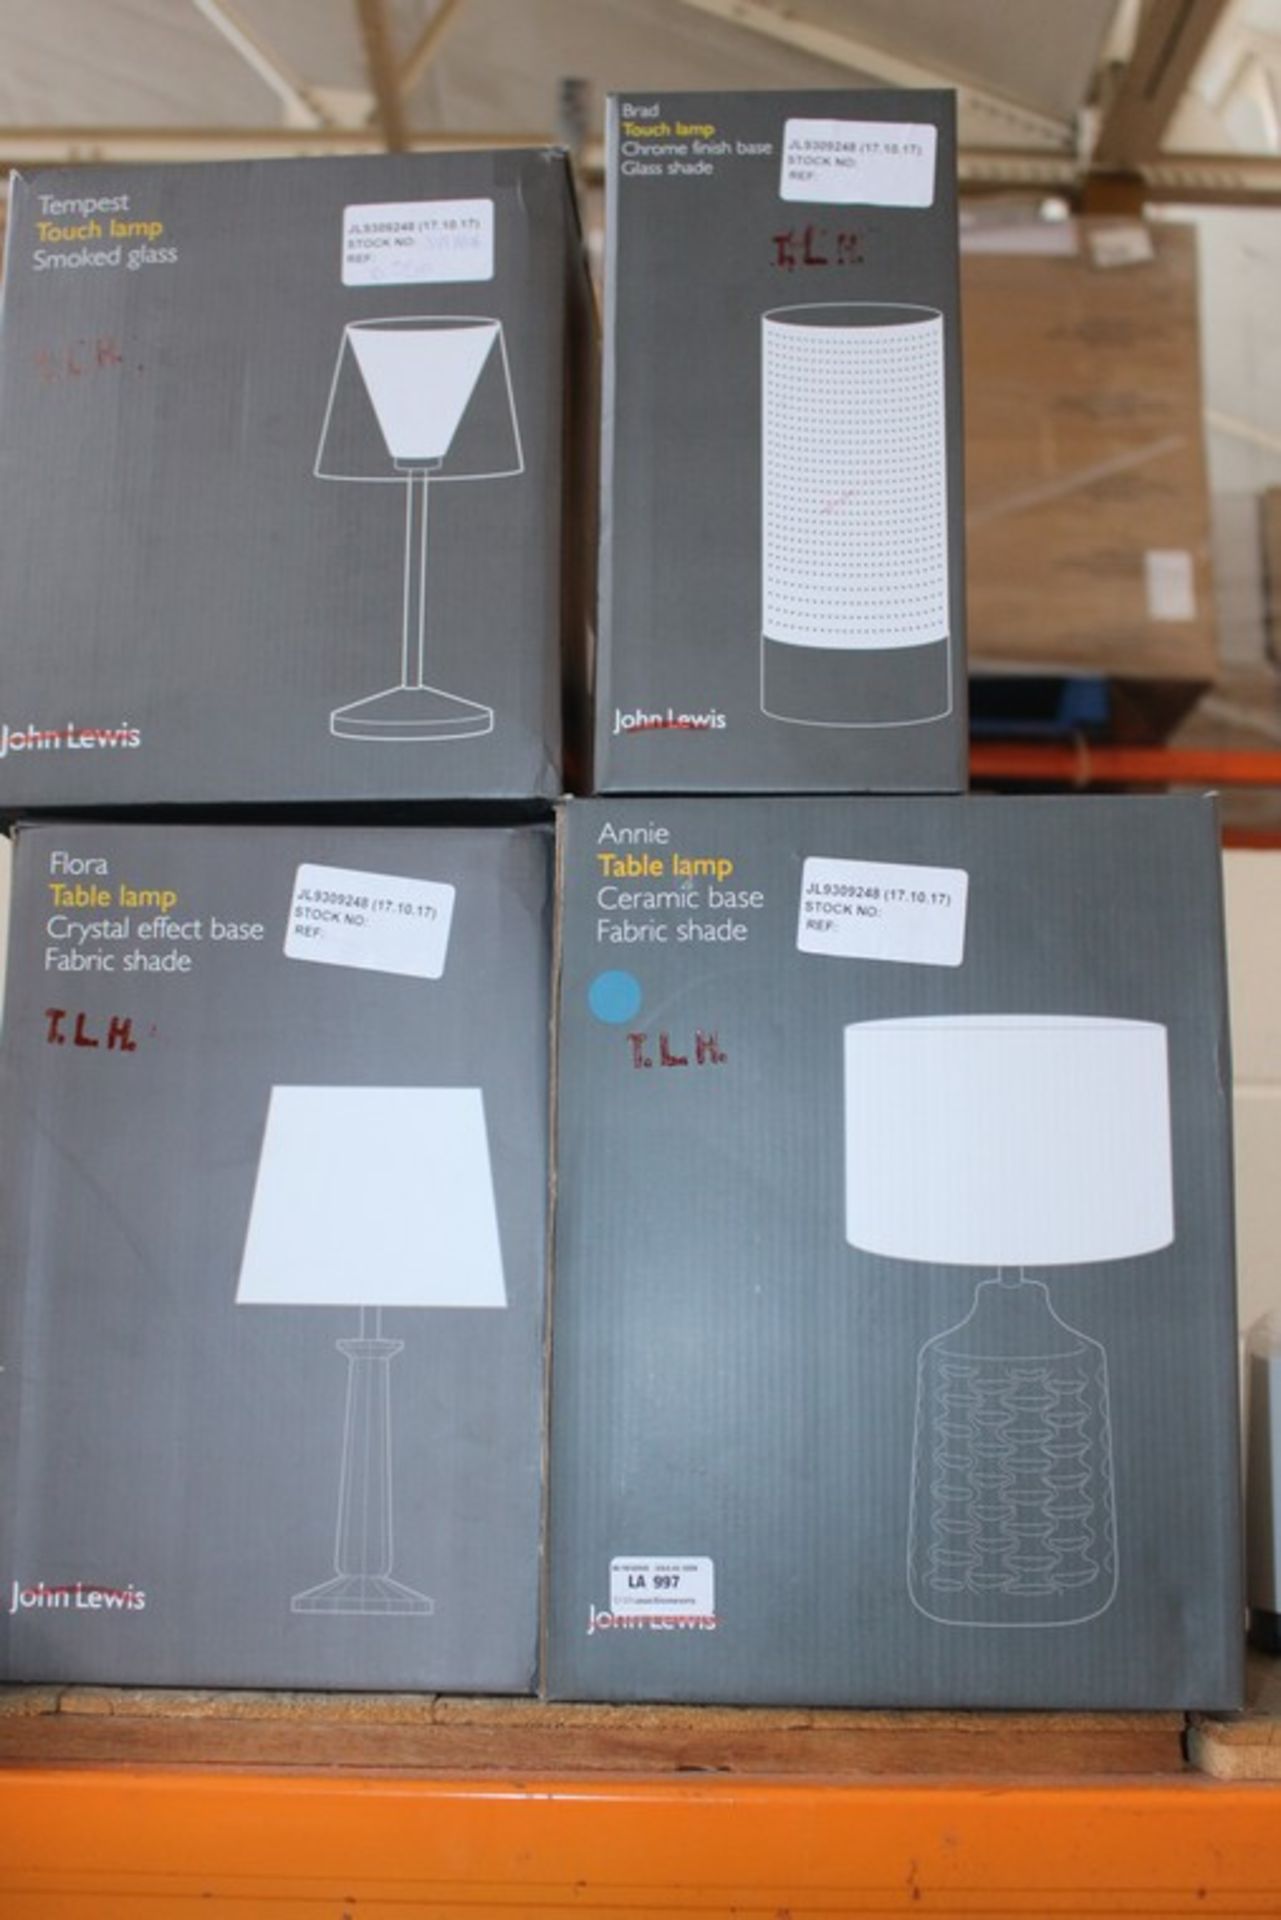 4 x BOXED ASSORTED LIGHTS TO INCLUDE A TEMPEST TOUCH LAMP, A FLORA TABLE LAMP AND OTHER (17.10.